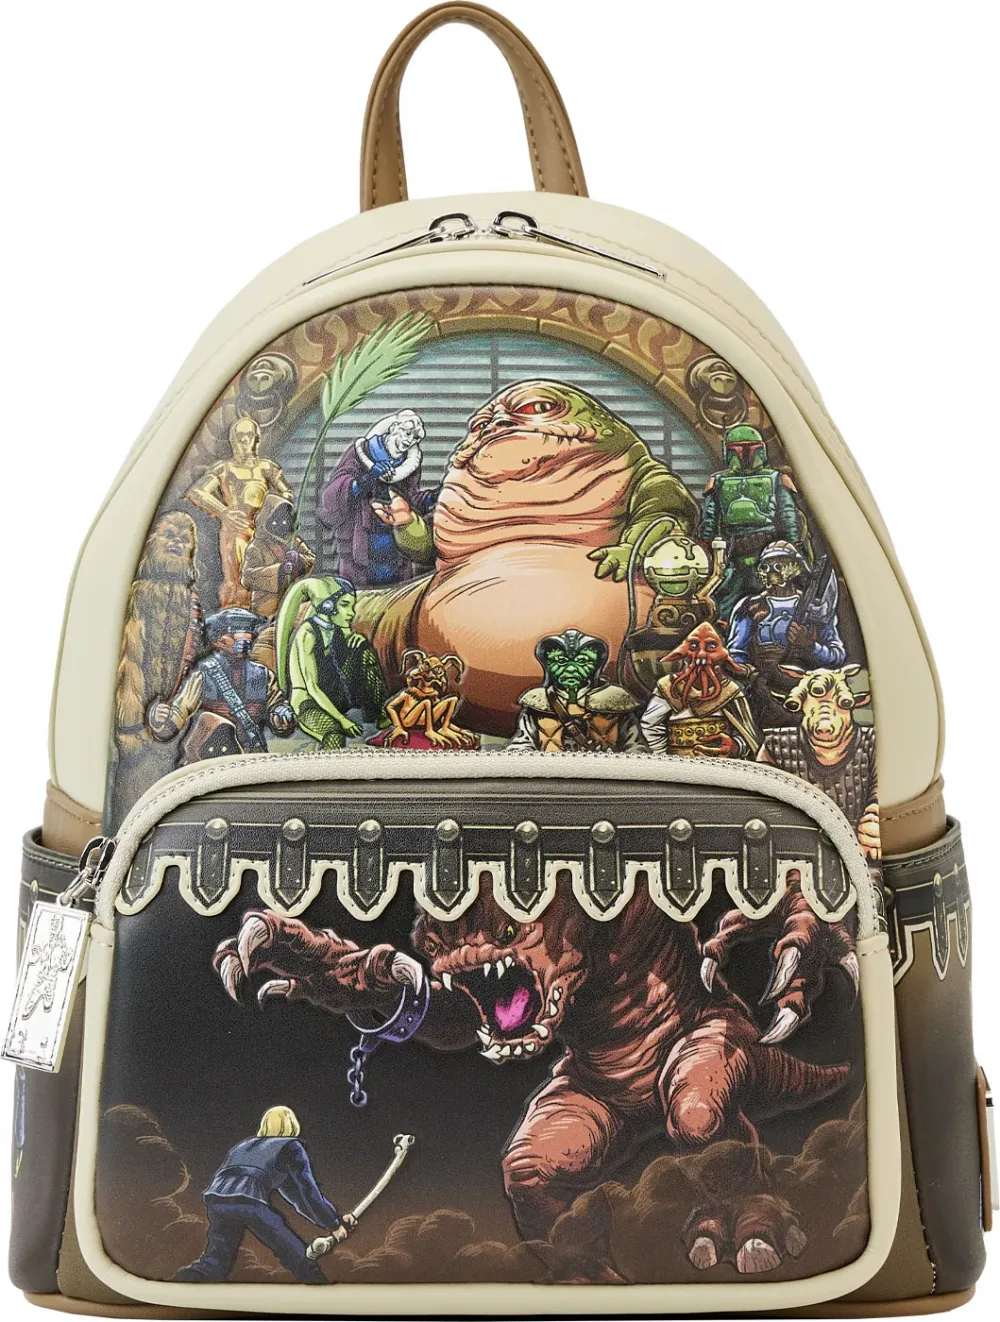 Star Wars Return of the Jedi Jabba’s Palace Scenes Mini Backpack Loungefly